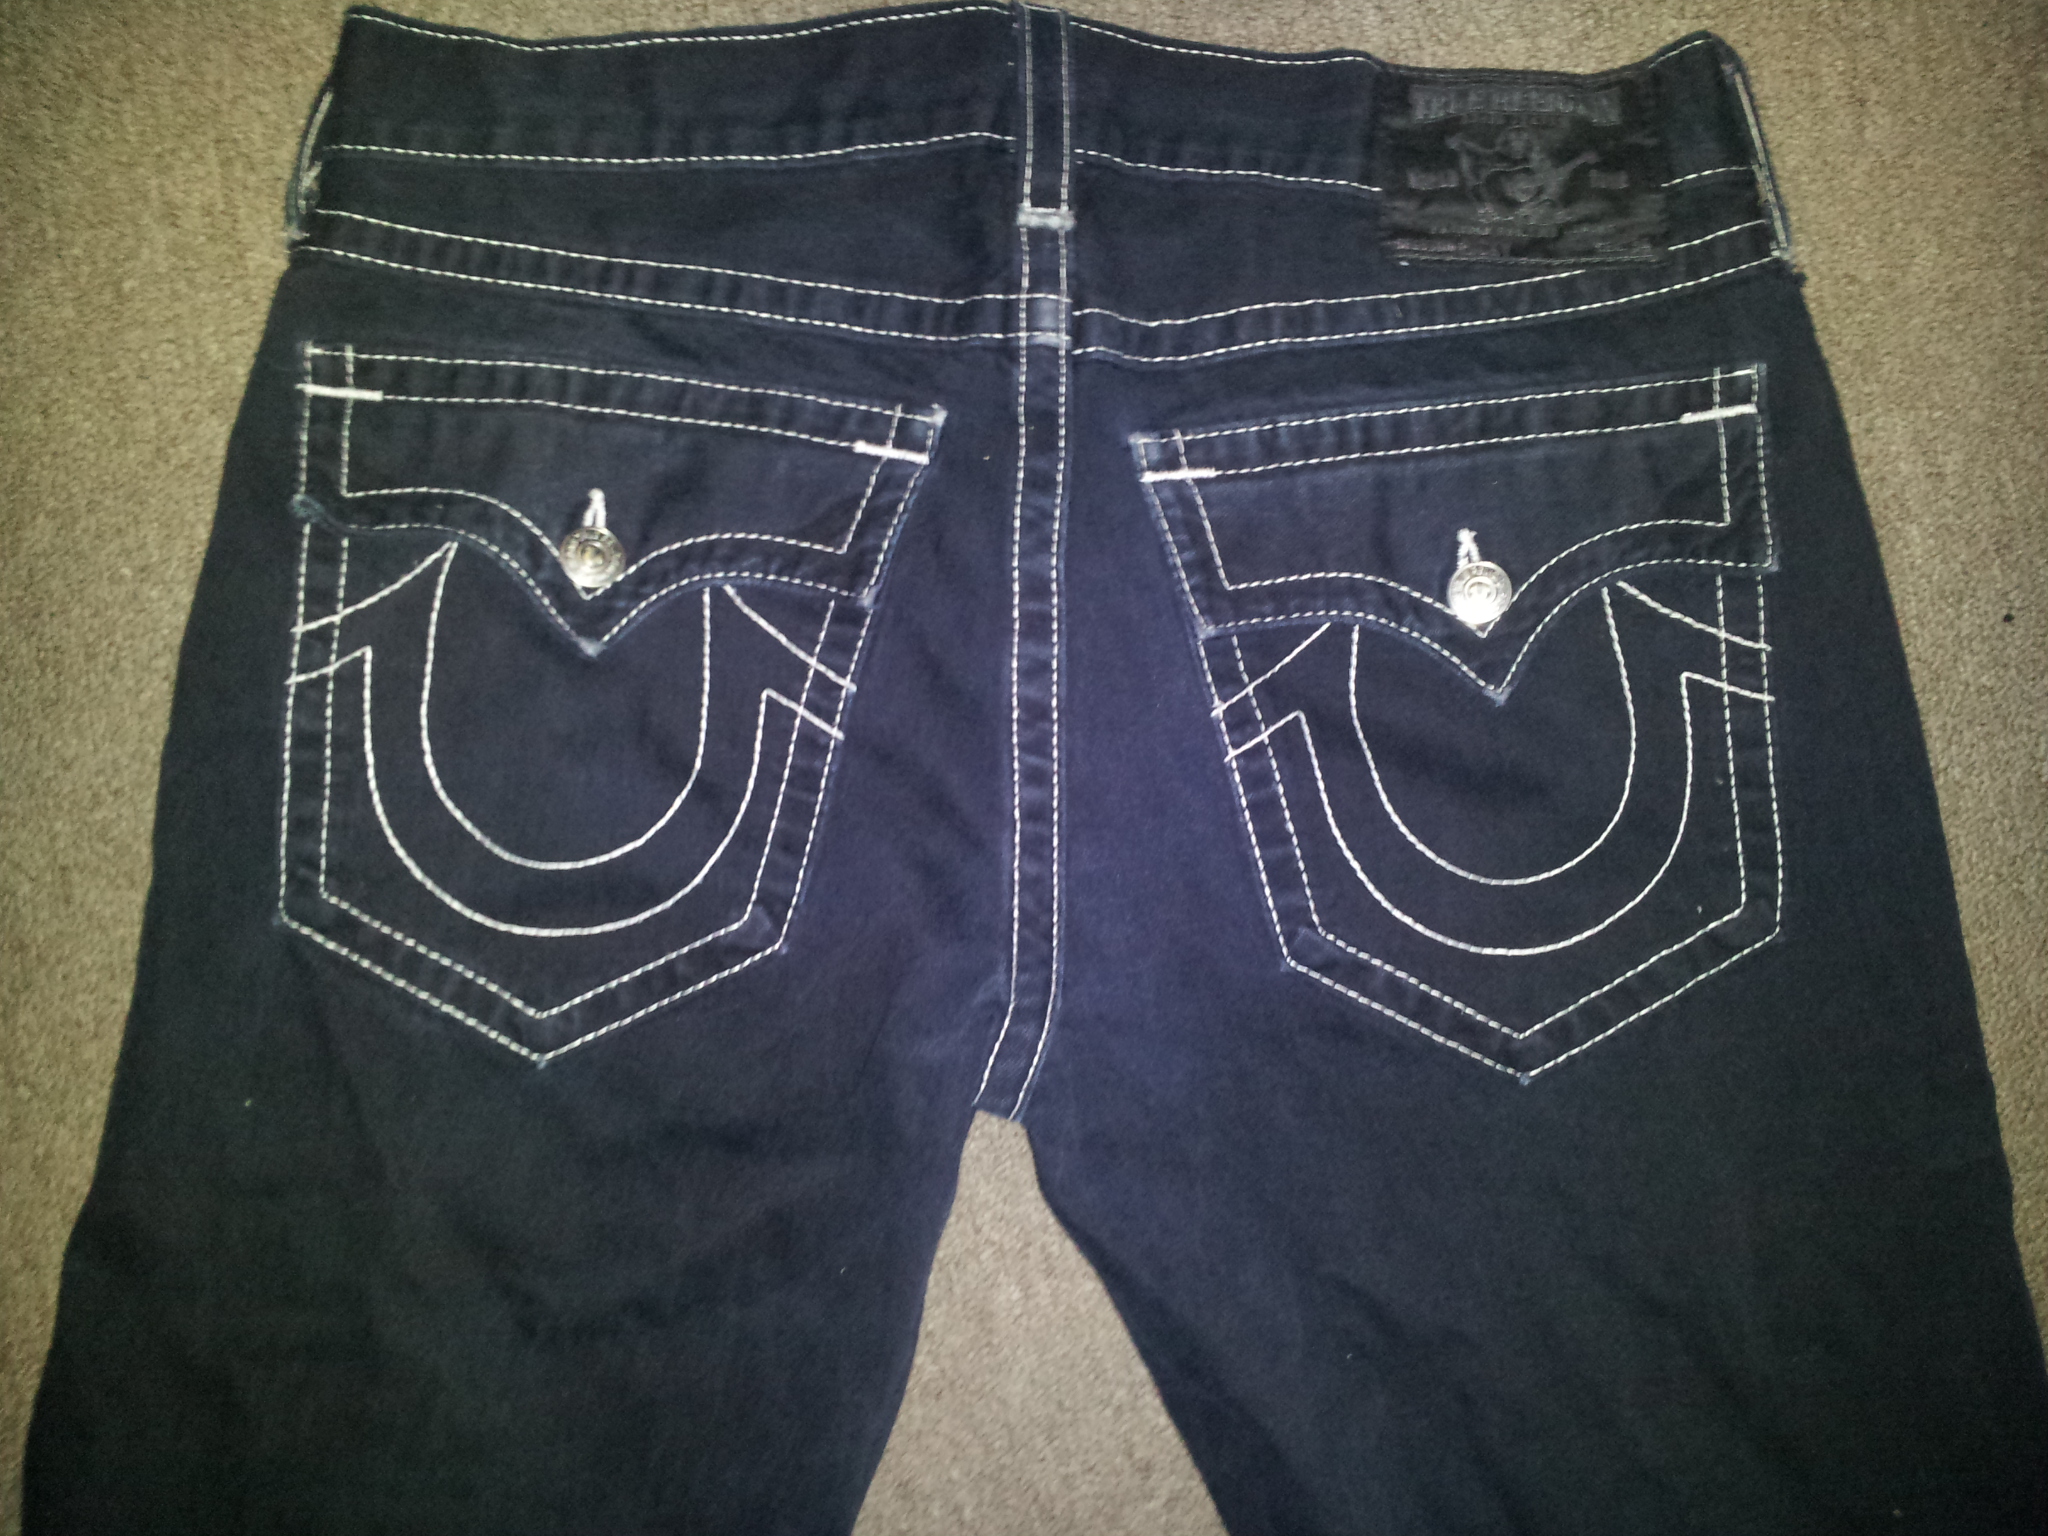 Can TRUE RELIGION Jeans have a ROUNDED 